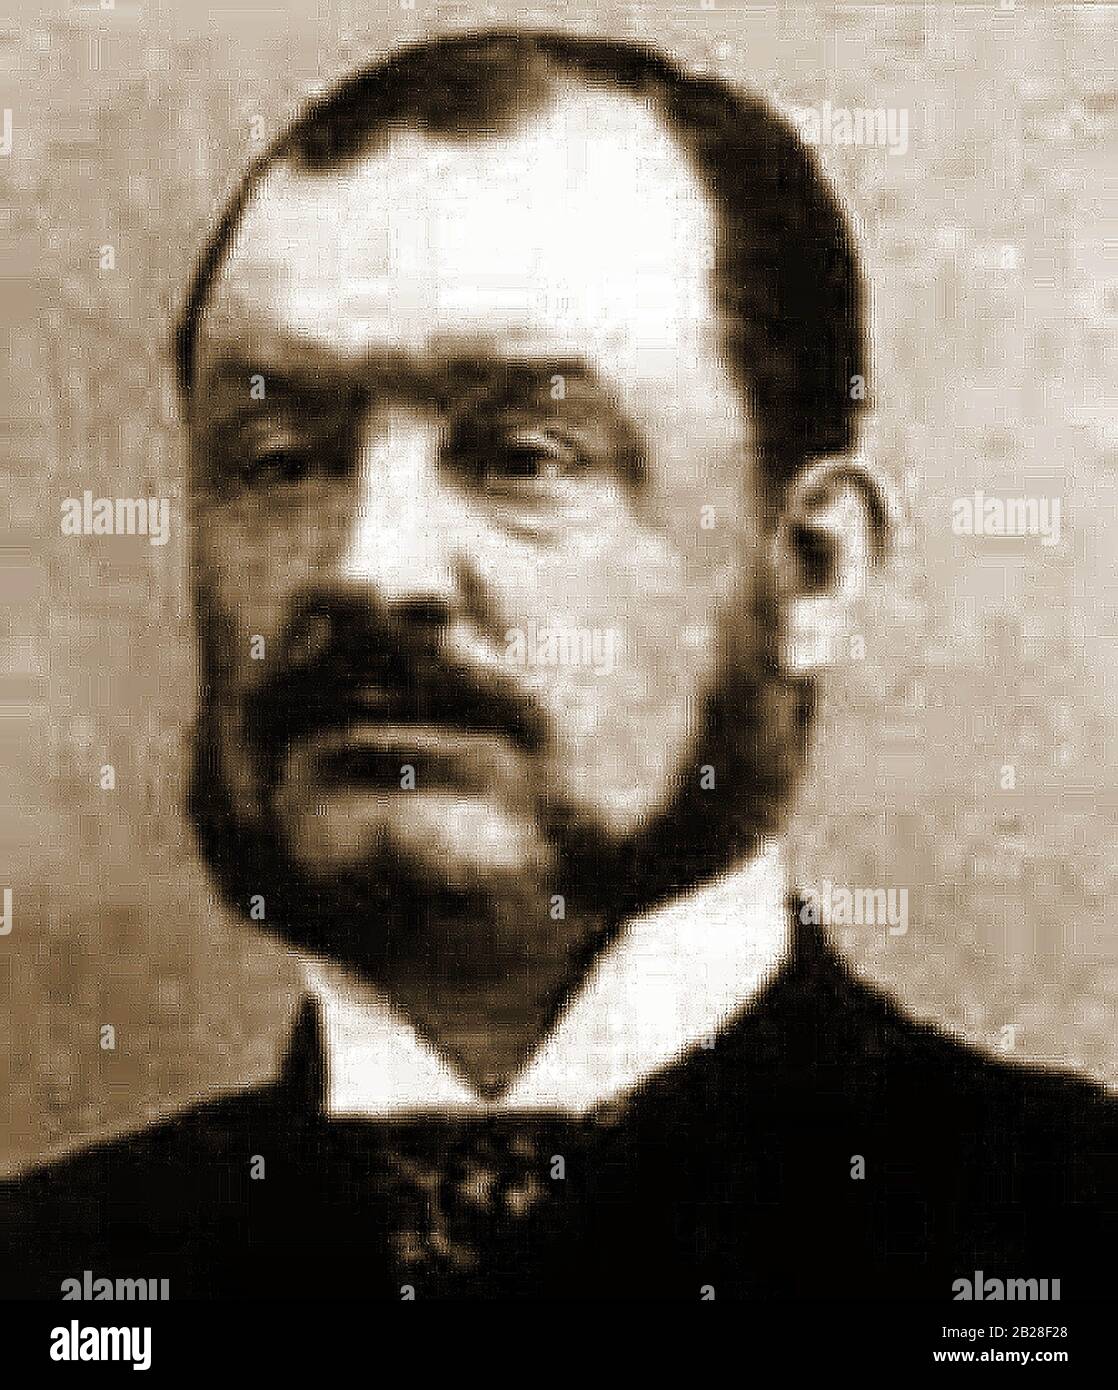 A portrait of 19th century Yorkshire Hangman James Berry (1852-1913) of  Heckmondwyke. He refined  the long drop method developed by William Marwood to diminish suffering of the prisoner being hanged. He was known for a number of negative incidents in his career including being responsible for  the commuted sentence of  John Babbacombe Lee – 'The Man They Couldn't Hang' – in 1885( The trap door repeatedly failed to open ); the decapitation of one man and the near decapitation of others. He was finally relieved of his post. Stock Photo